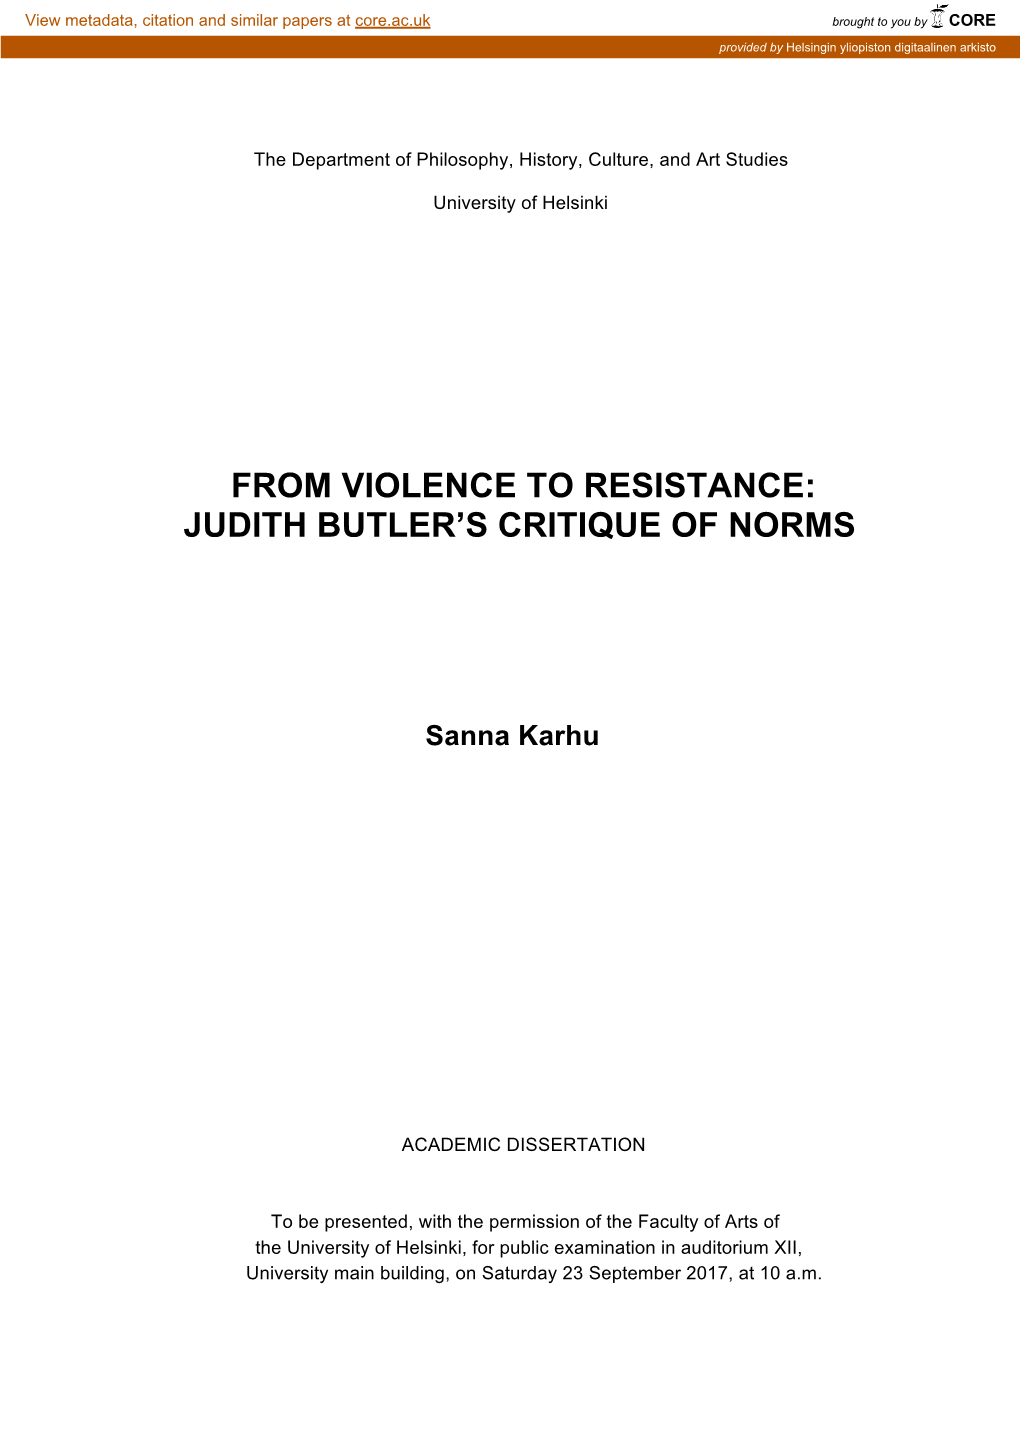 From Violence to Resistance: Judith Butler's Critique Of